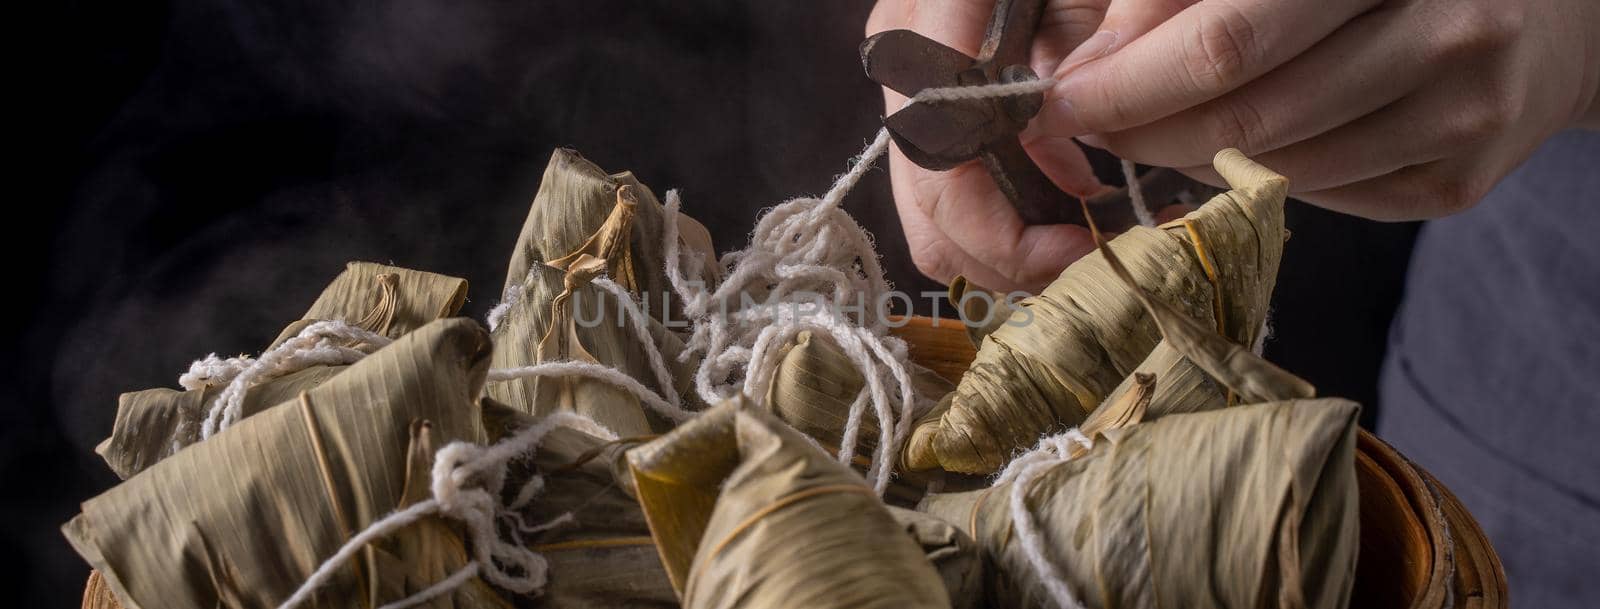 Rice dumpling, zongzi - Dragon Boat Festival, Bunch of Chinese traditional cooked food in steamer on wooden table over black background, close up, copy space